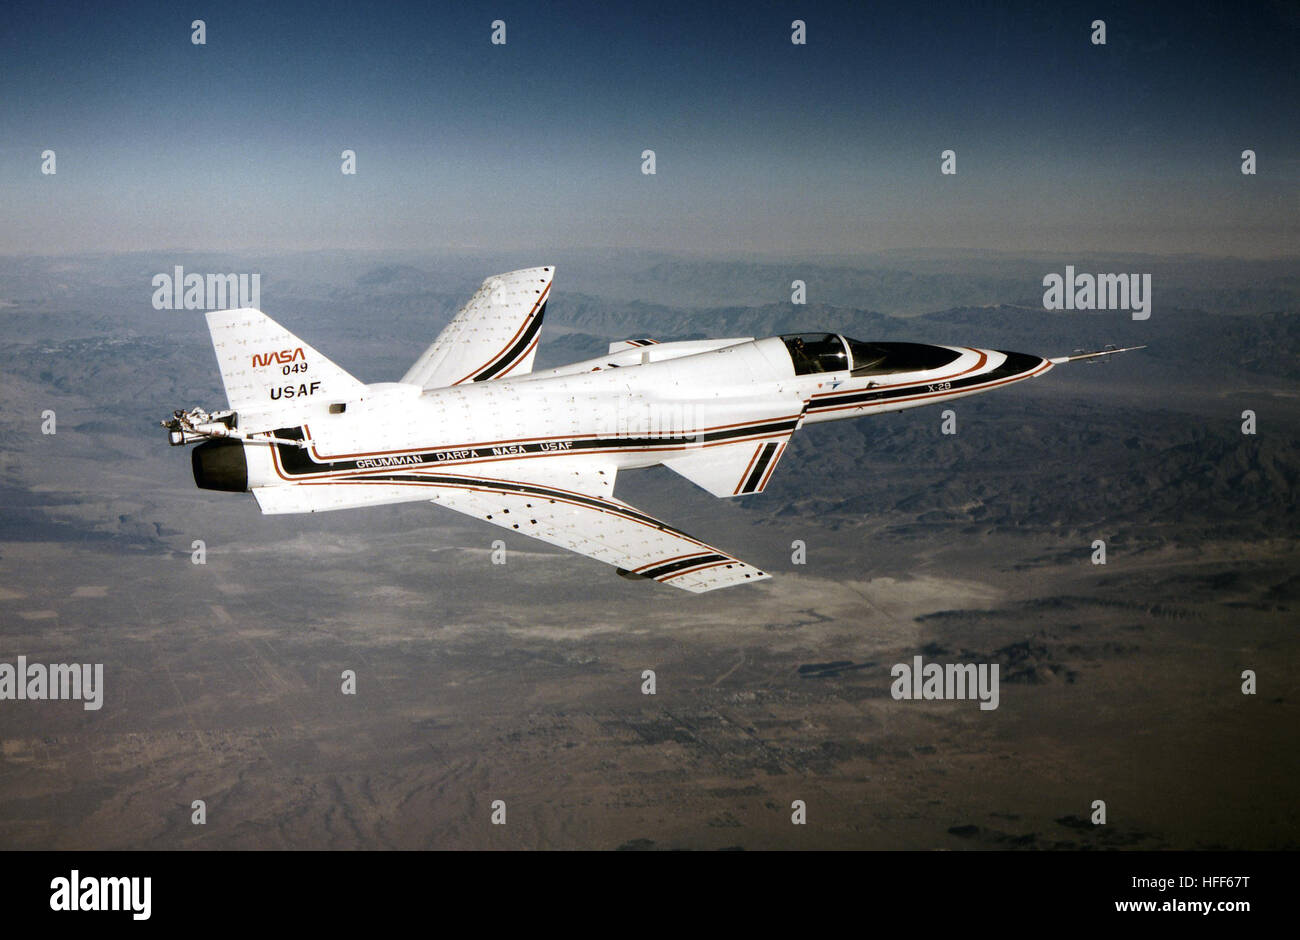 EC90-039-4 The No. 2 X-29 technology demonstrator aircraft is seen here during a 1990 test flight. At this angle, the aircraft&amp;rsquo;s unique forward-swept wing design is clearly visible. The X-29 was flown by NASA's Ames-Dryden Flight Research Facility later redesignated the Dryden Flight Research Center, Edwards, California, in a joint NASA-Defense Advanced Research Projects Agency-Air Force program to investigate the unique design's high-angle-of-attack characteristics and its military utility. Tufts -- small strips of cloth attached to the surface of the aircraft to visually study the  Stock Photo